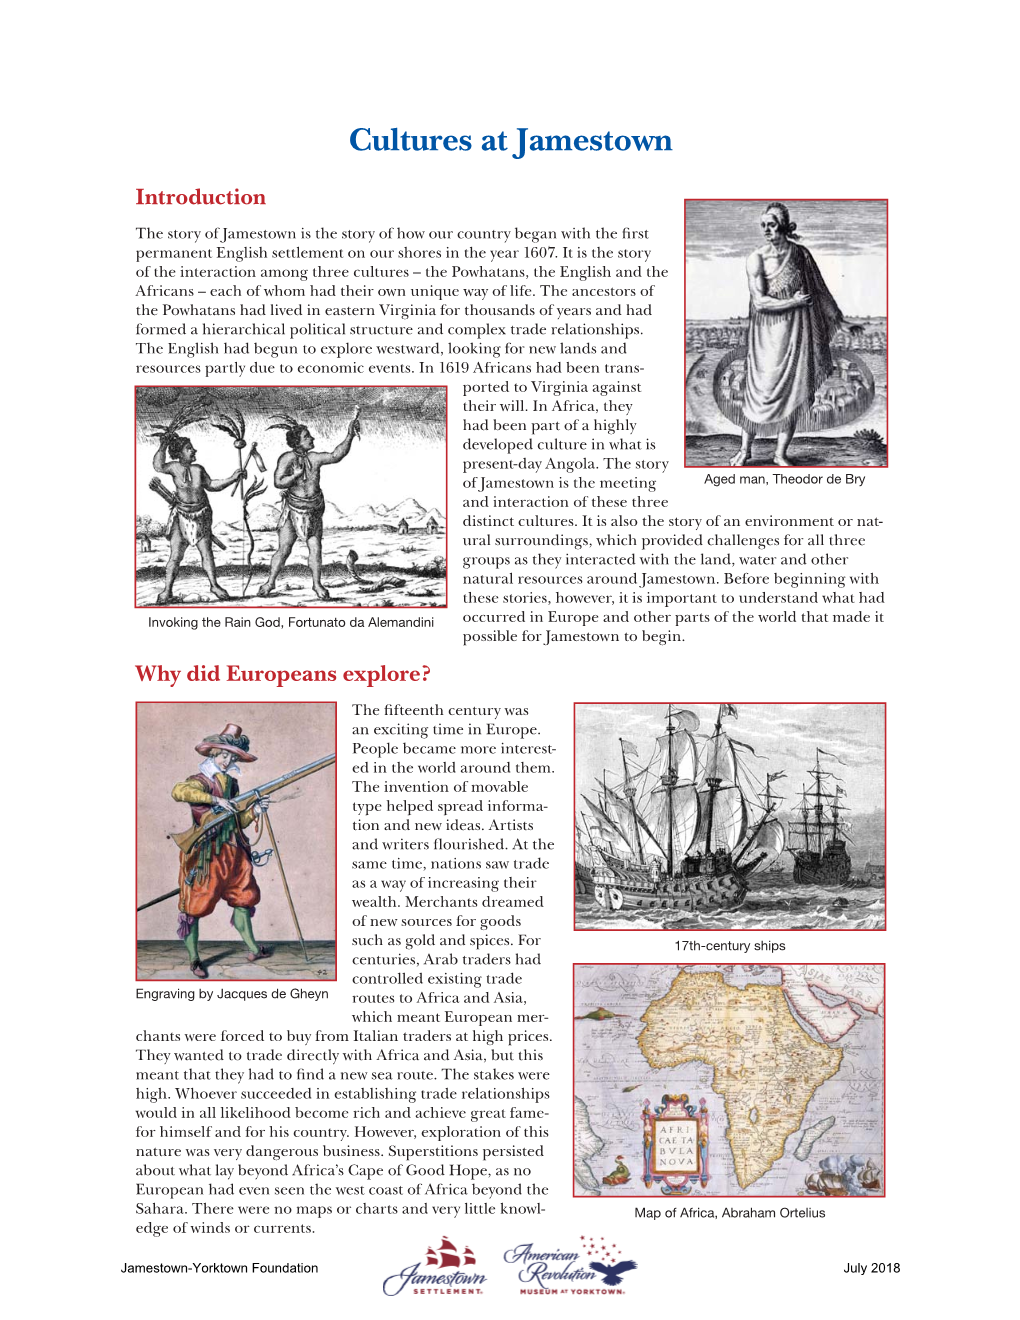 Cultures at Jamestown Information Packet